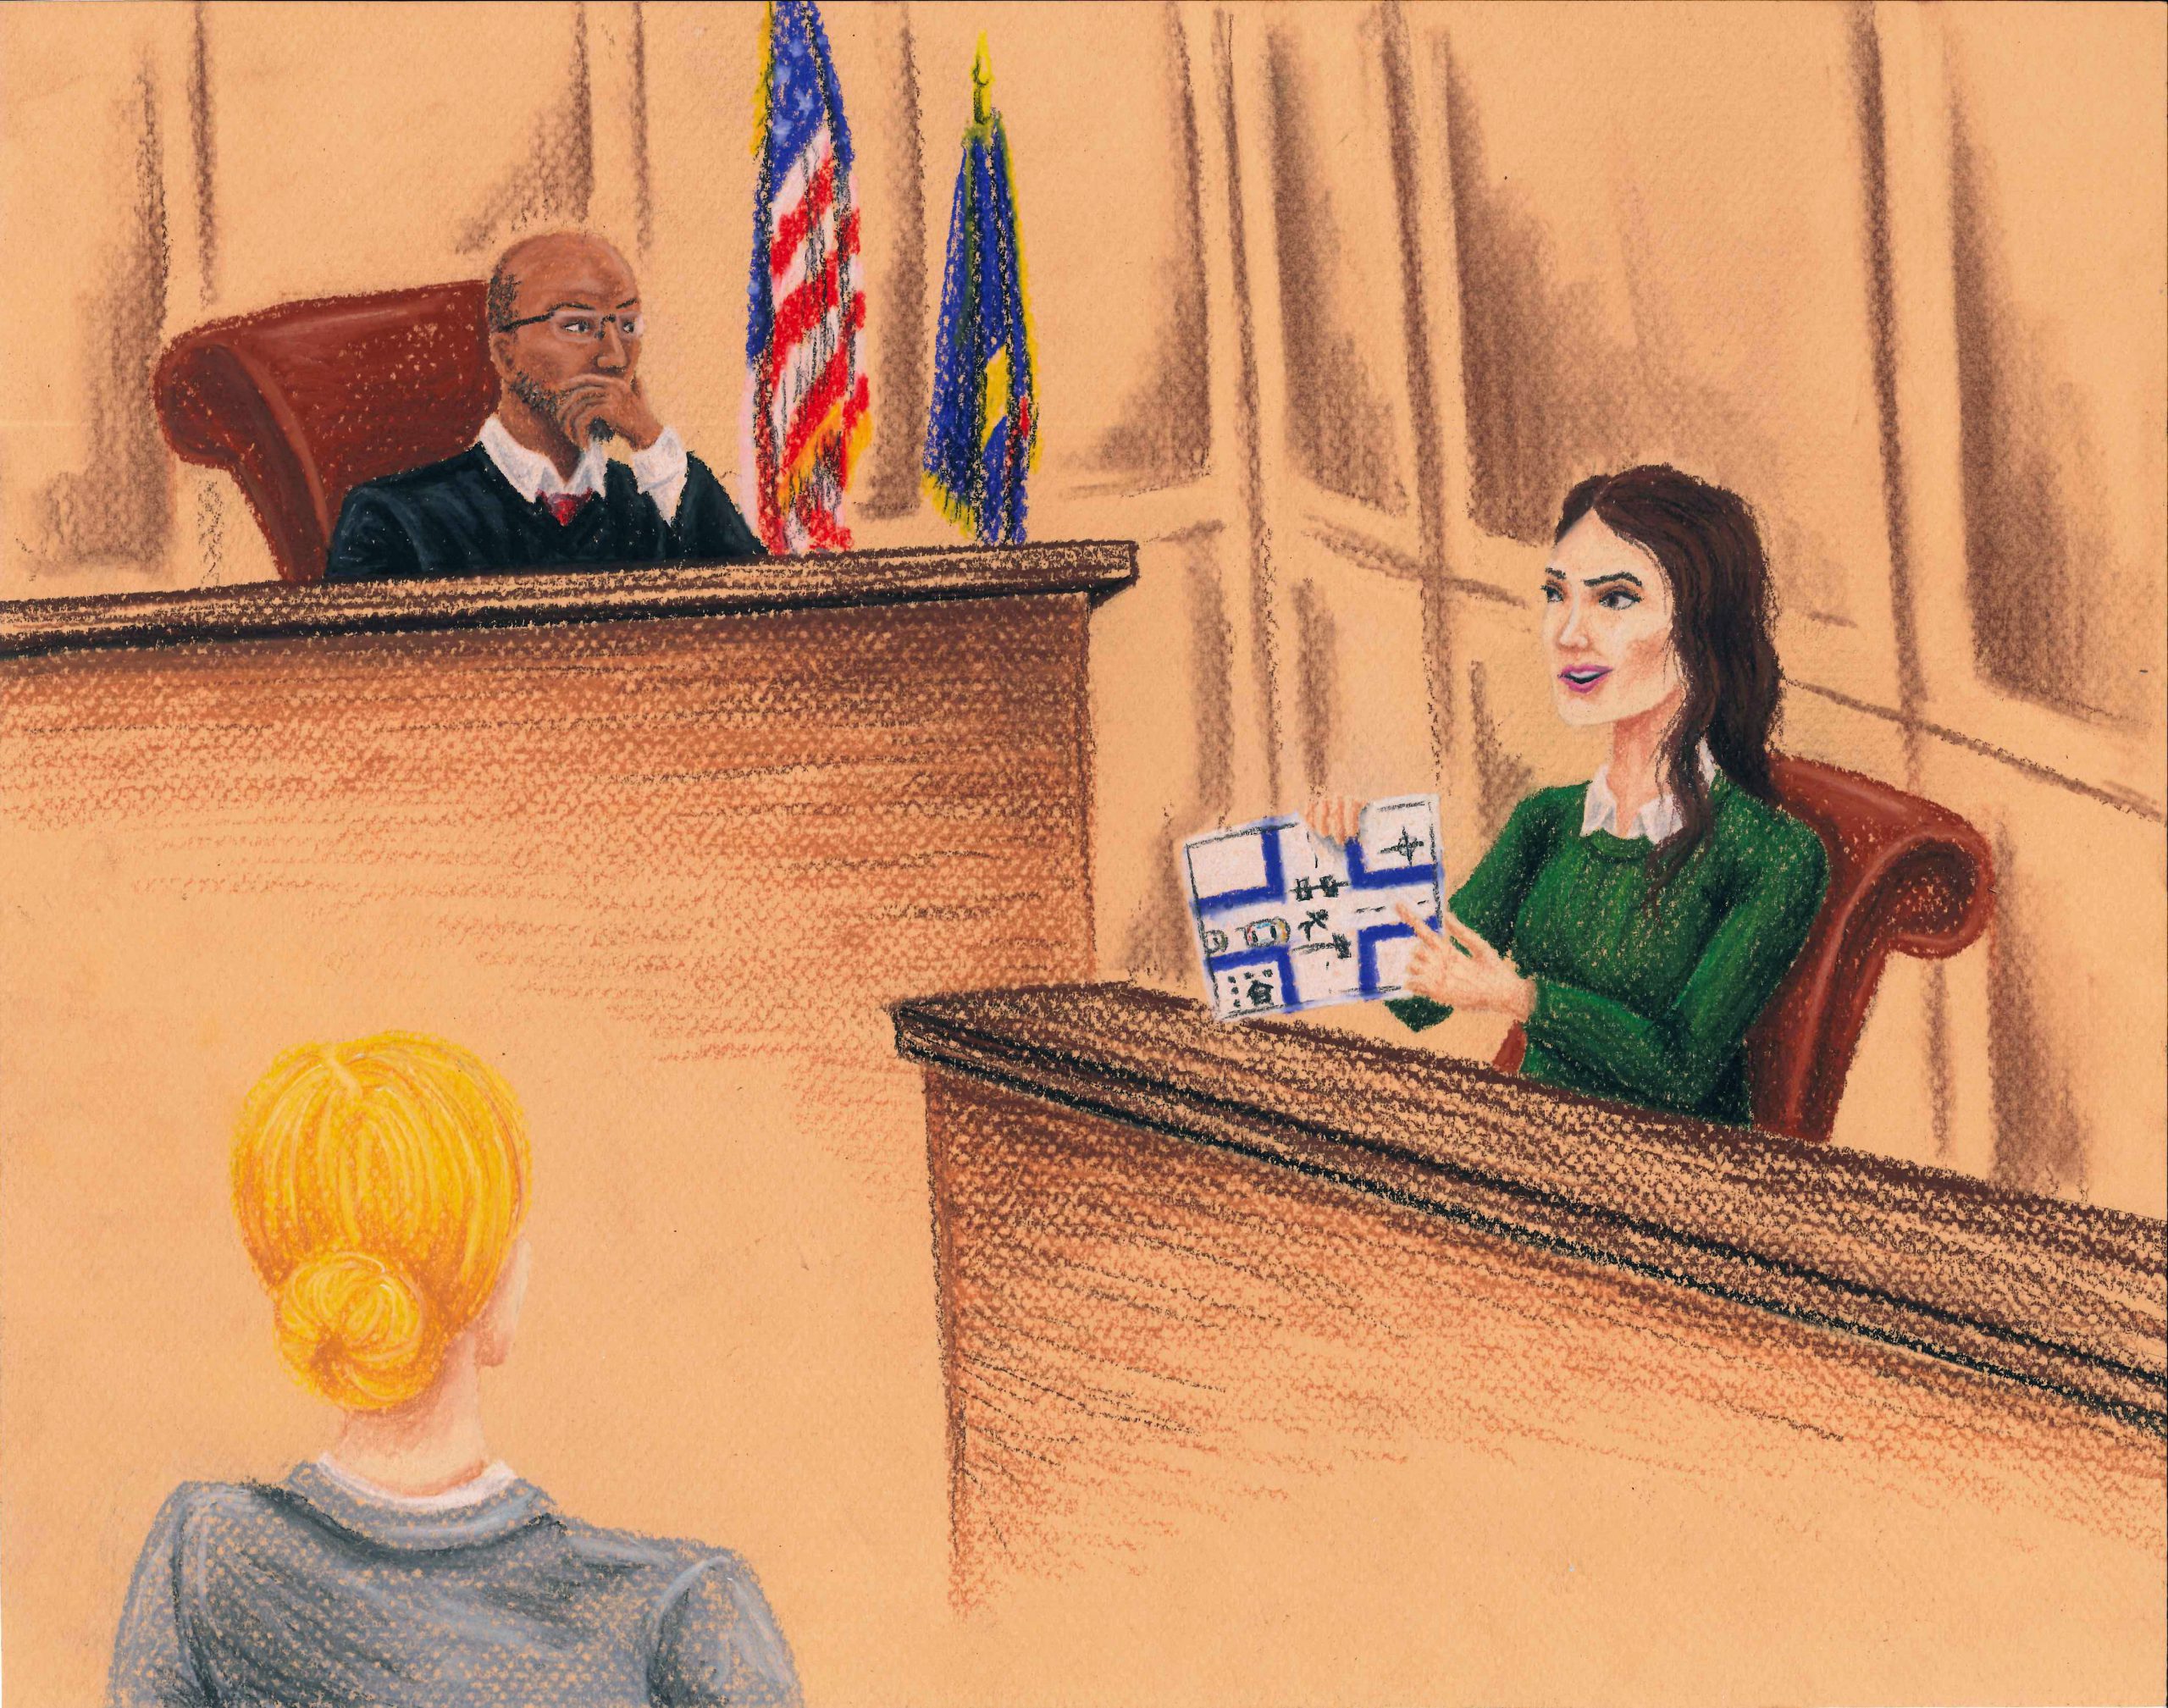 2022 Fourth Place, National Courtroom Artist Contest